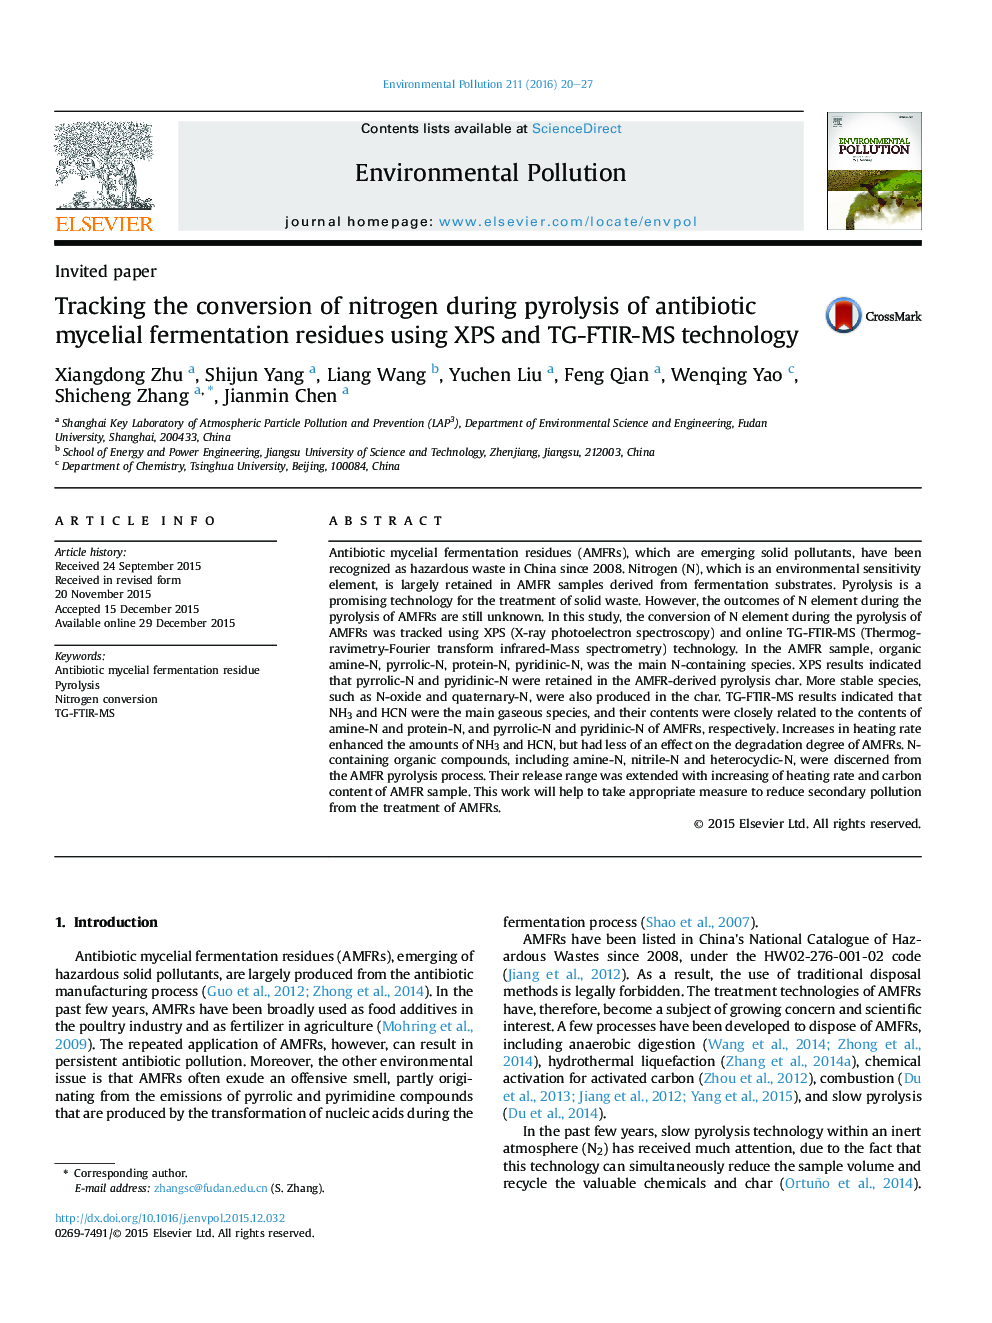 Invited paperTracking the conversion of nitrogen during pyrolysis of antibiotic mycelial fermentation residues using XPS and TG-FTIR-MS technology